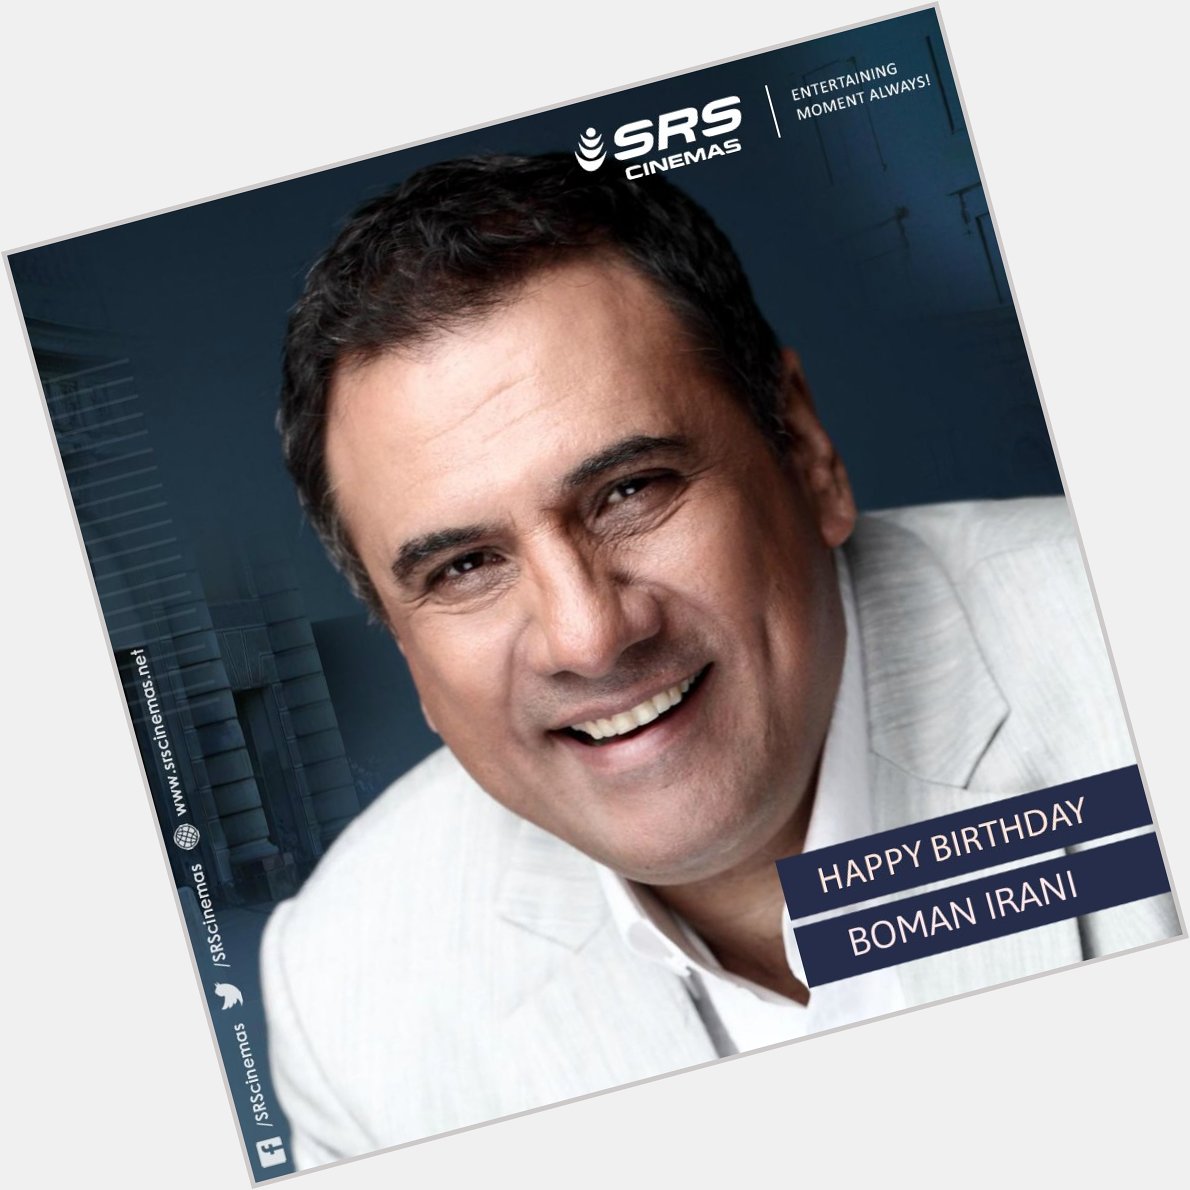 Wishing one of the finest comedic actors, Boman Irani, a very happy birthday! 